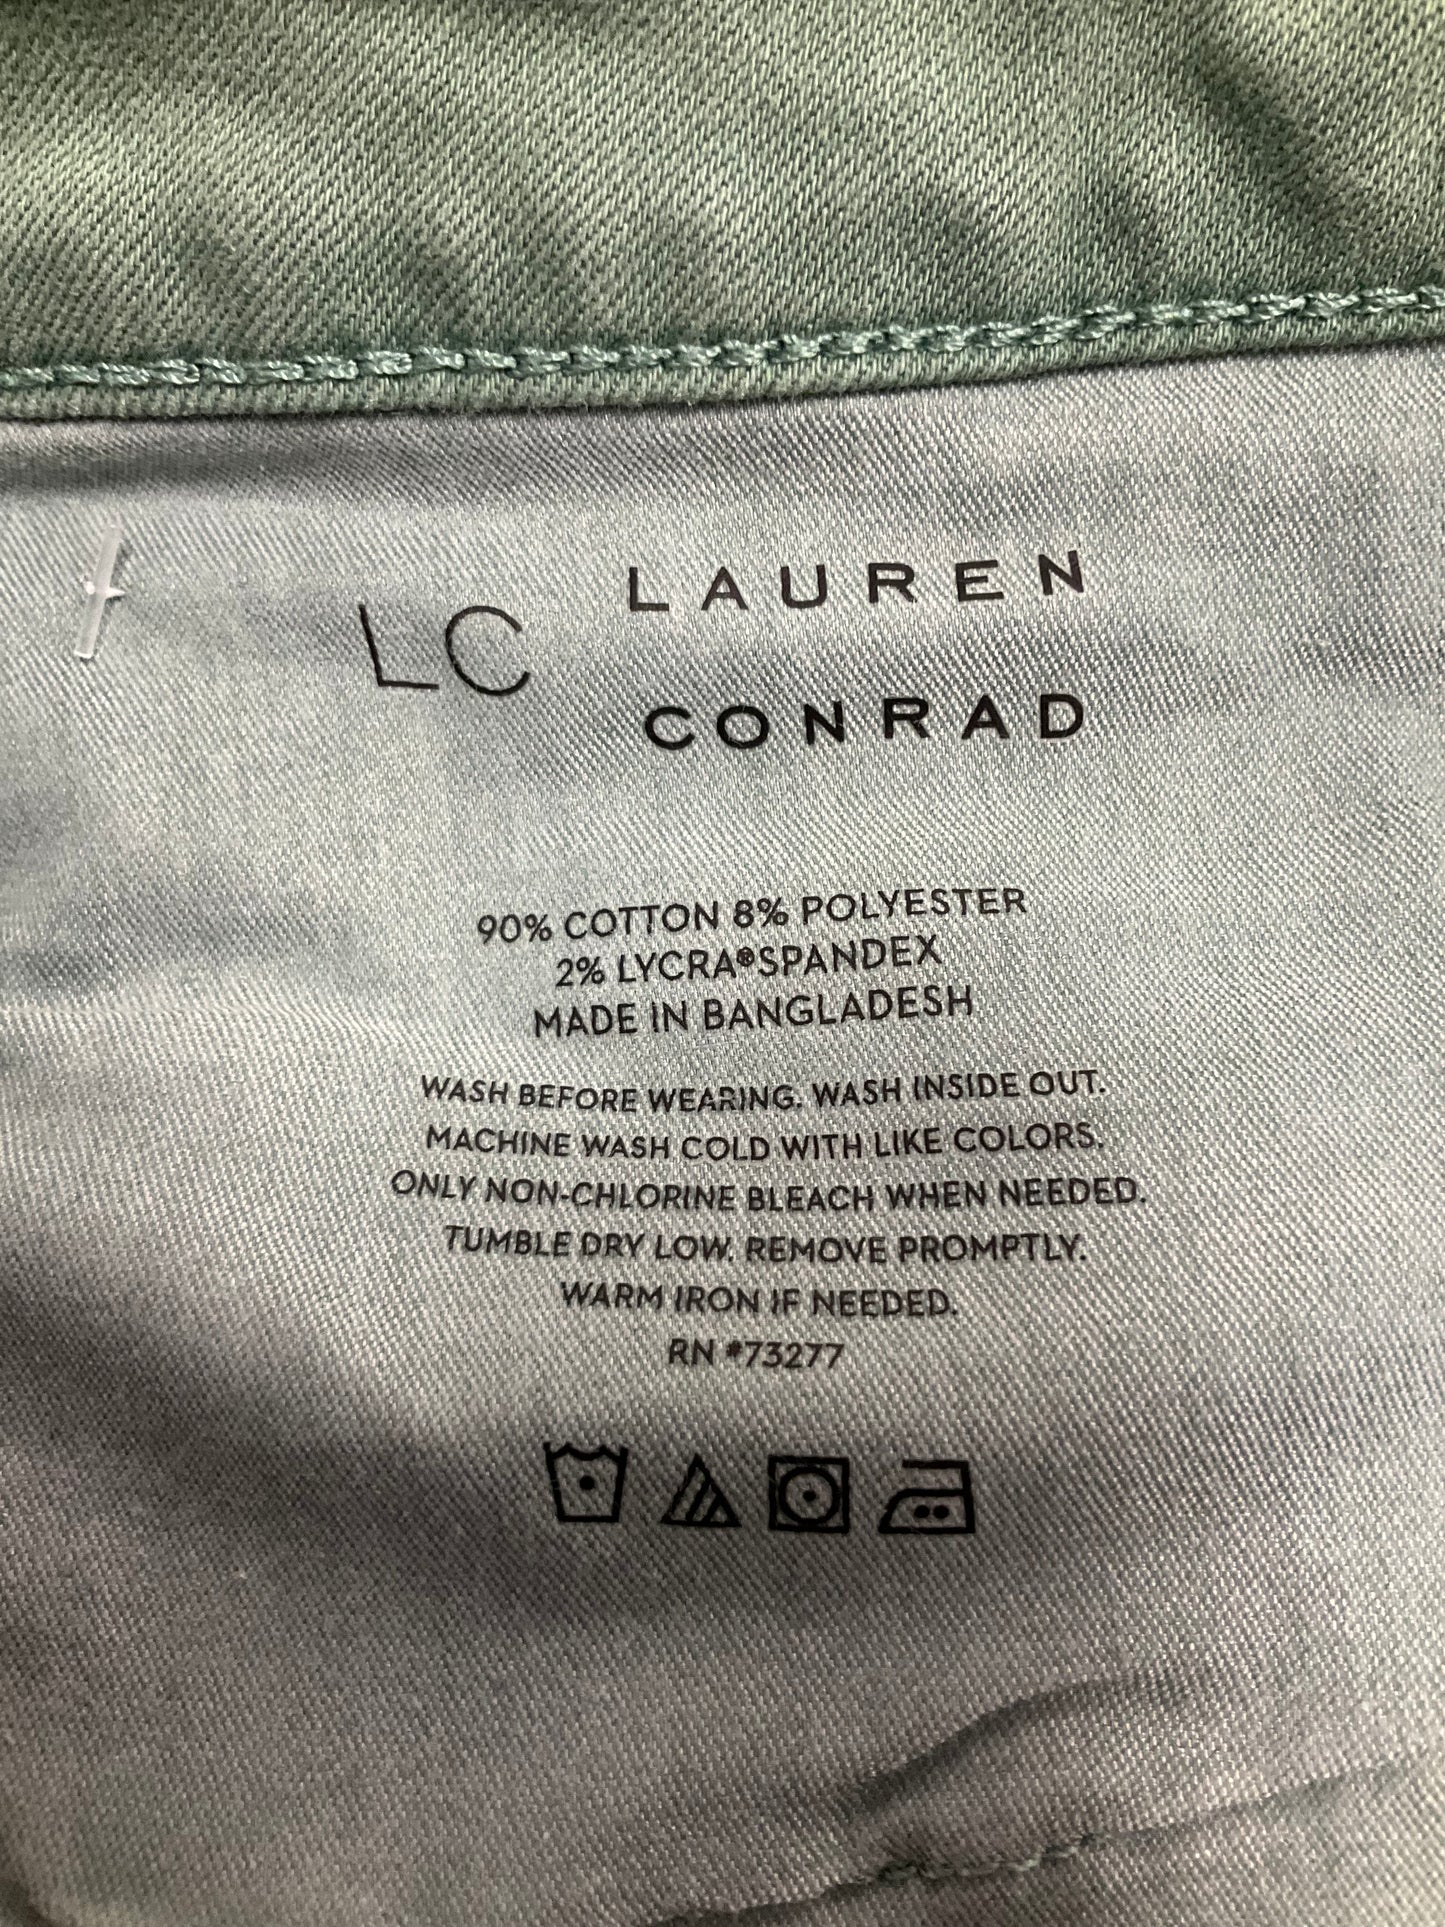 Shorts By Lc Lauren Conrad  Size: 14